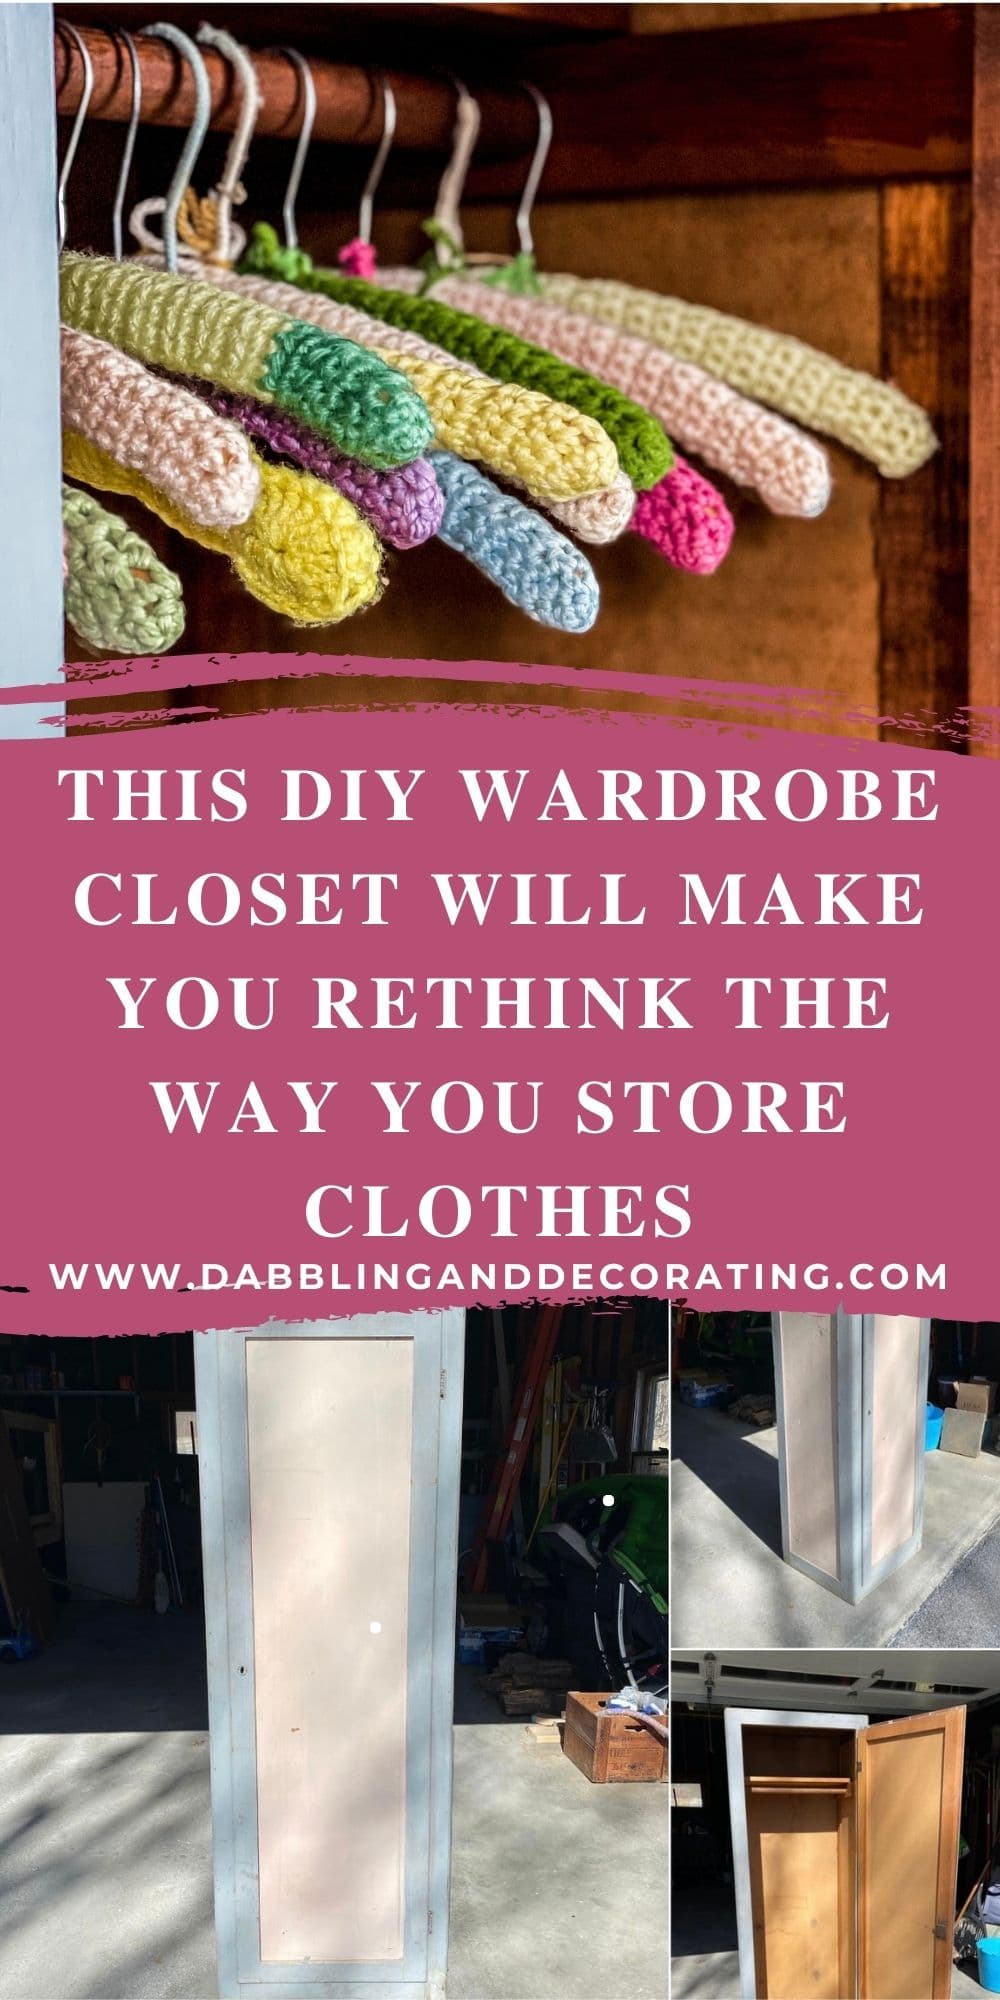 This DIY Wardrobe Closet Will Make You Rethink the Way You Store Clothes